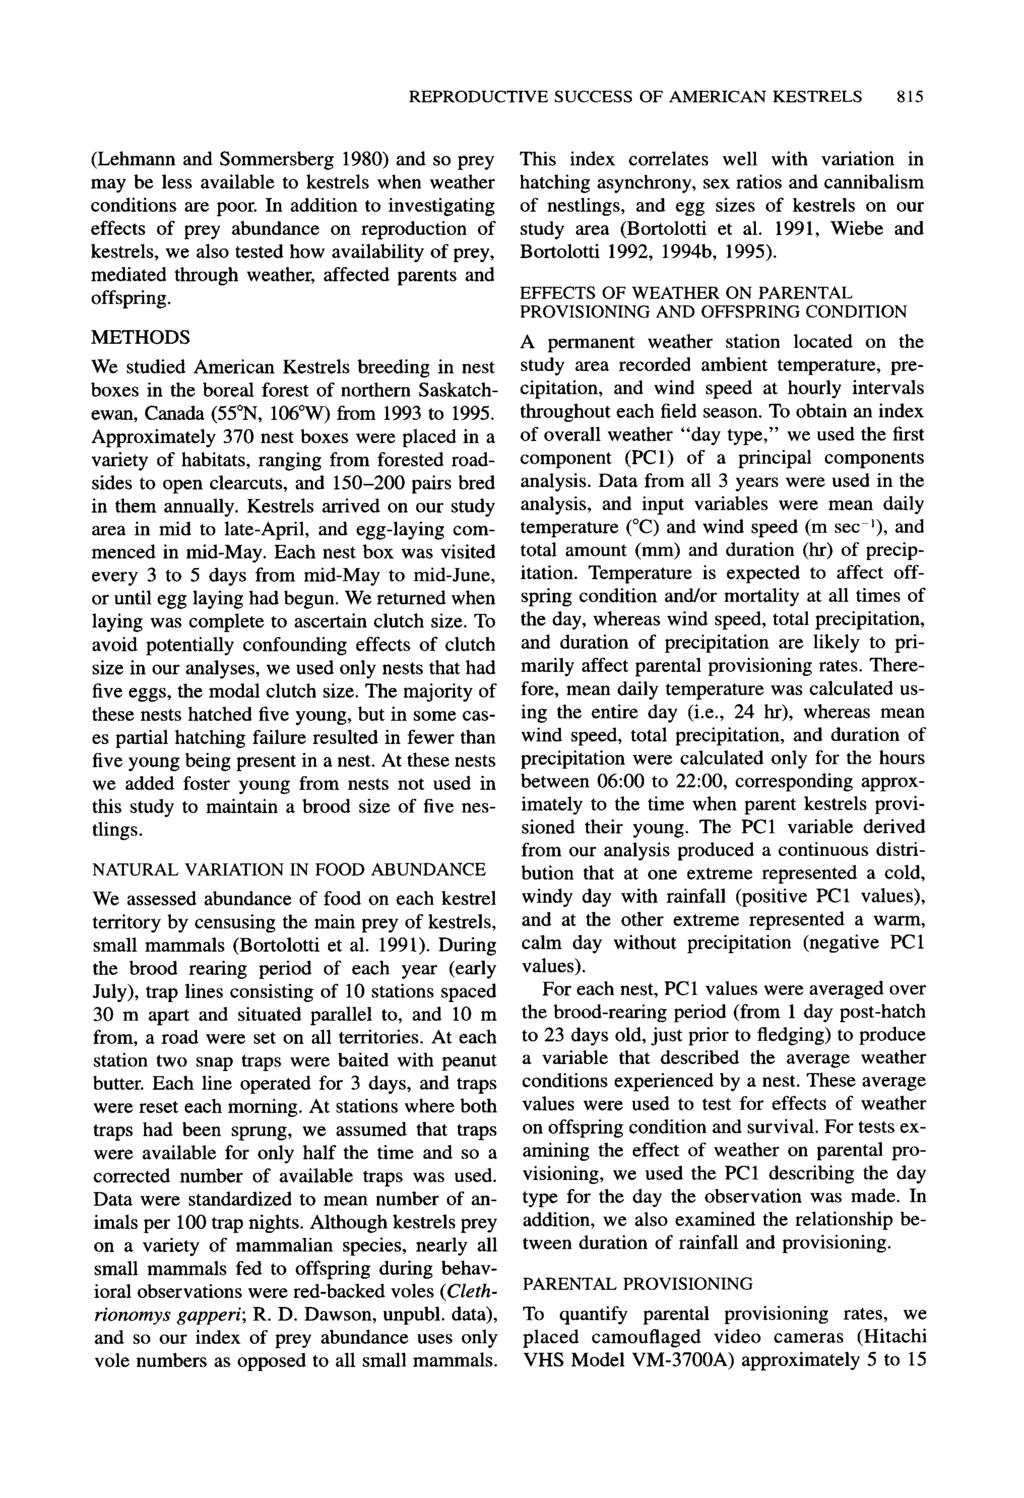 RERODUCTIVE SUCCESS OF AMERICAN KESTRELS 815 (Lehmann and Sommersberg 1980) and so prey may be less available to kestrels when weather conditions are poor.